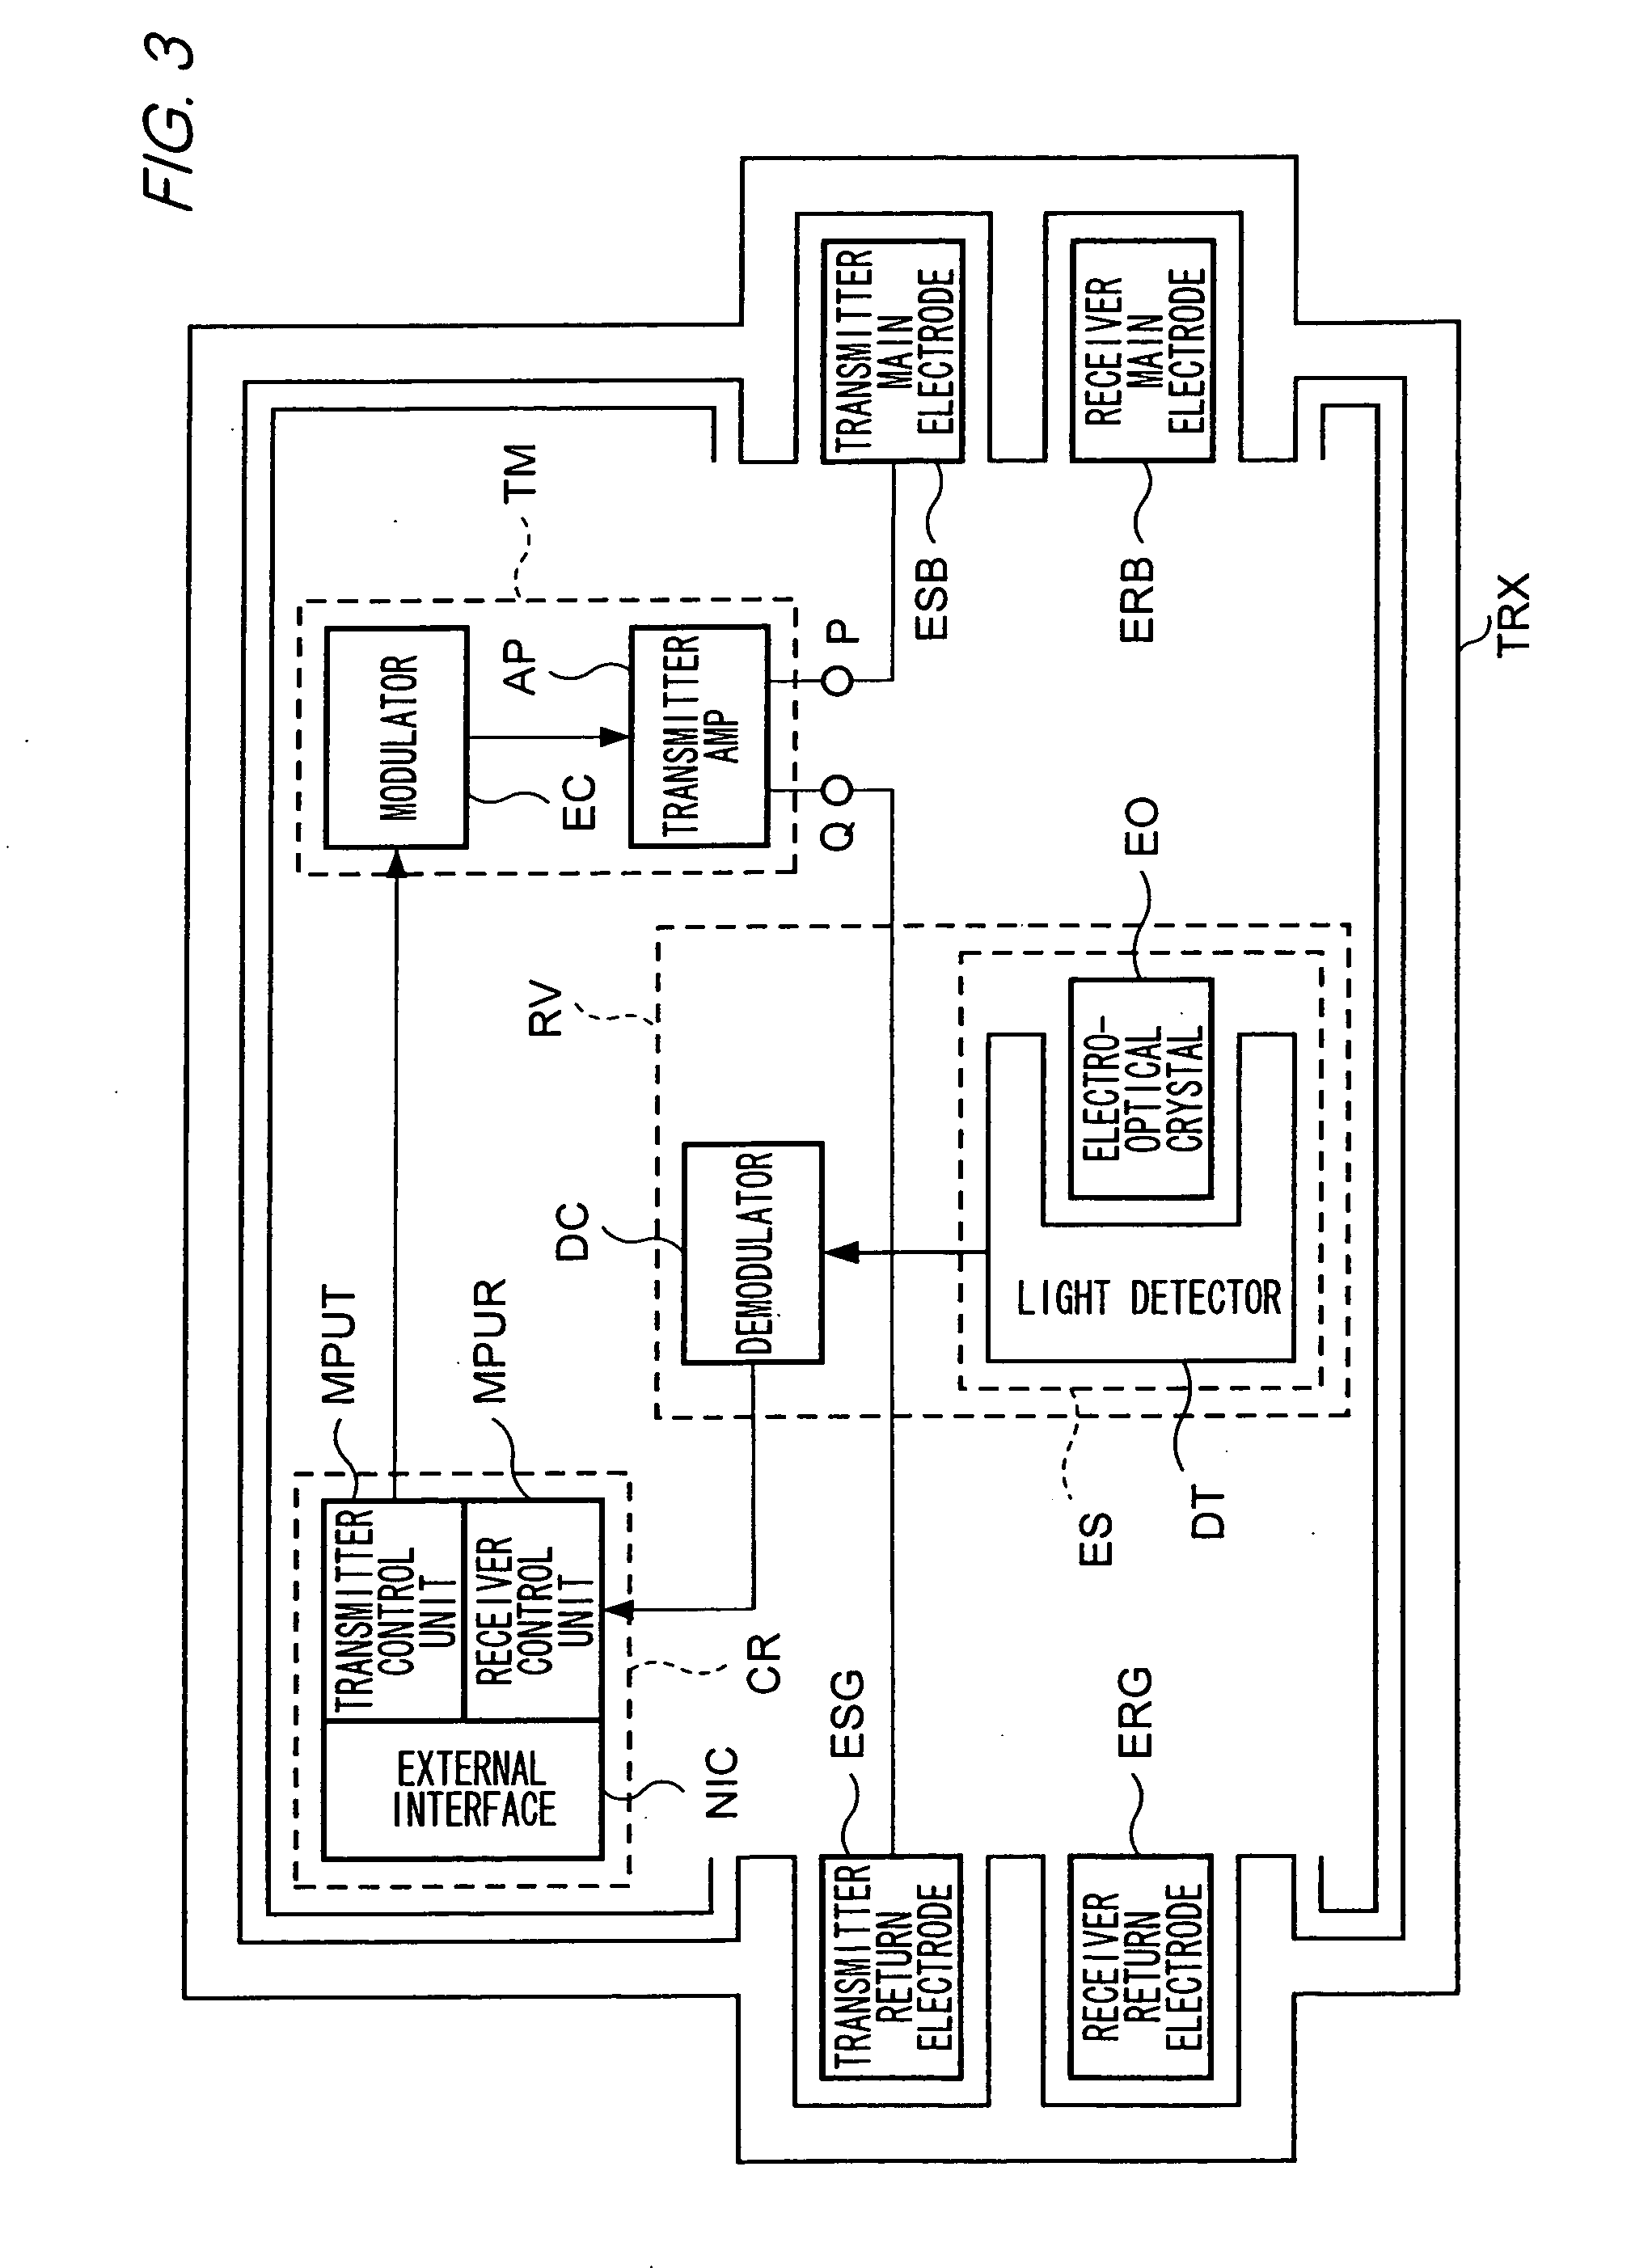 Electric-field communication system, electric-field communication device, and electrode disposing method